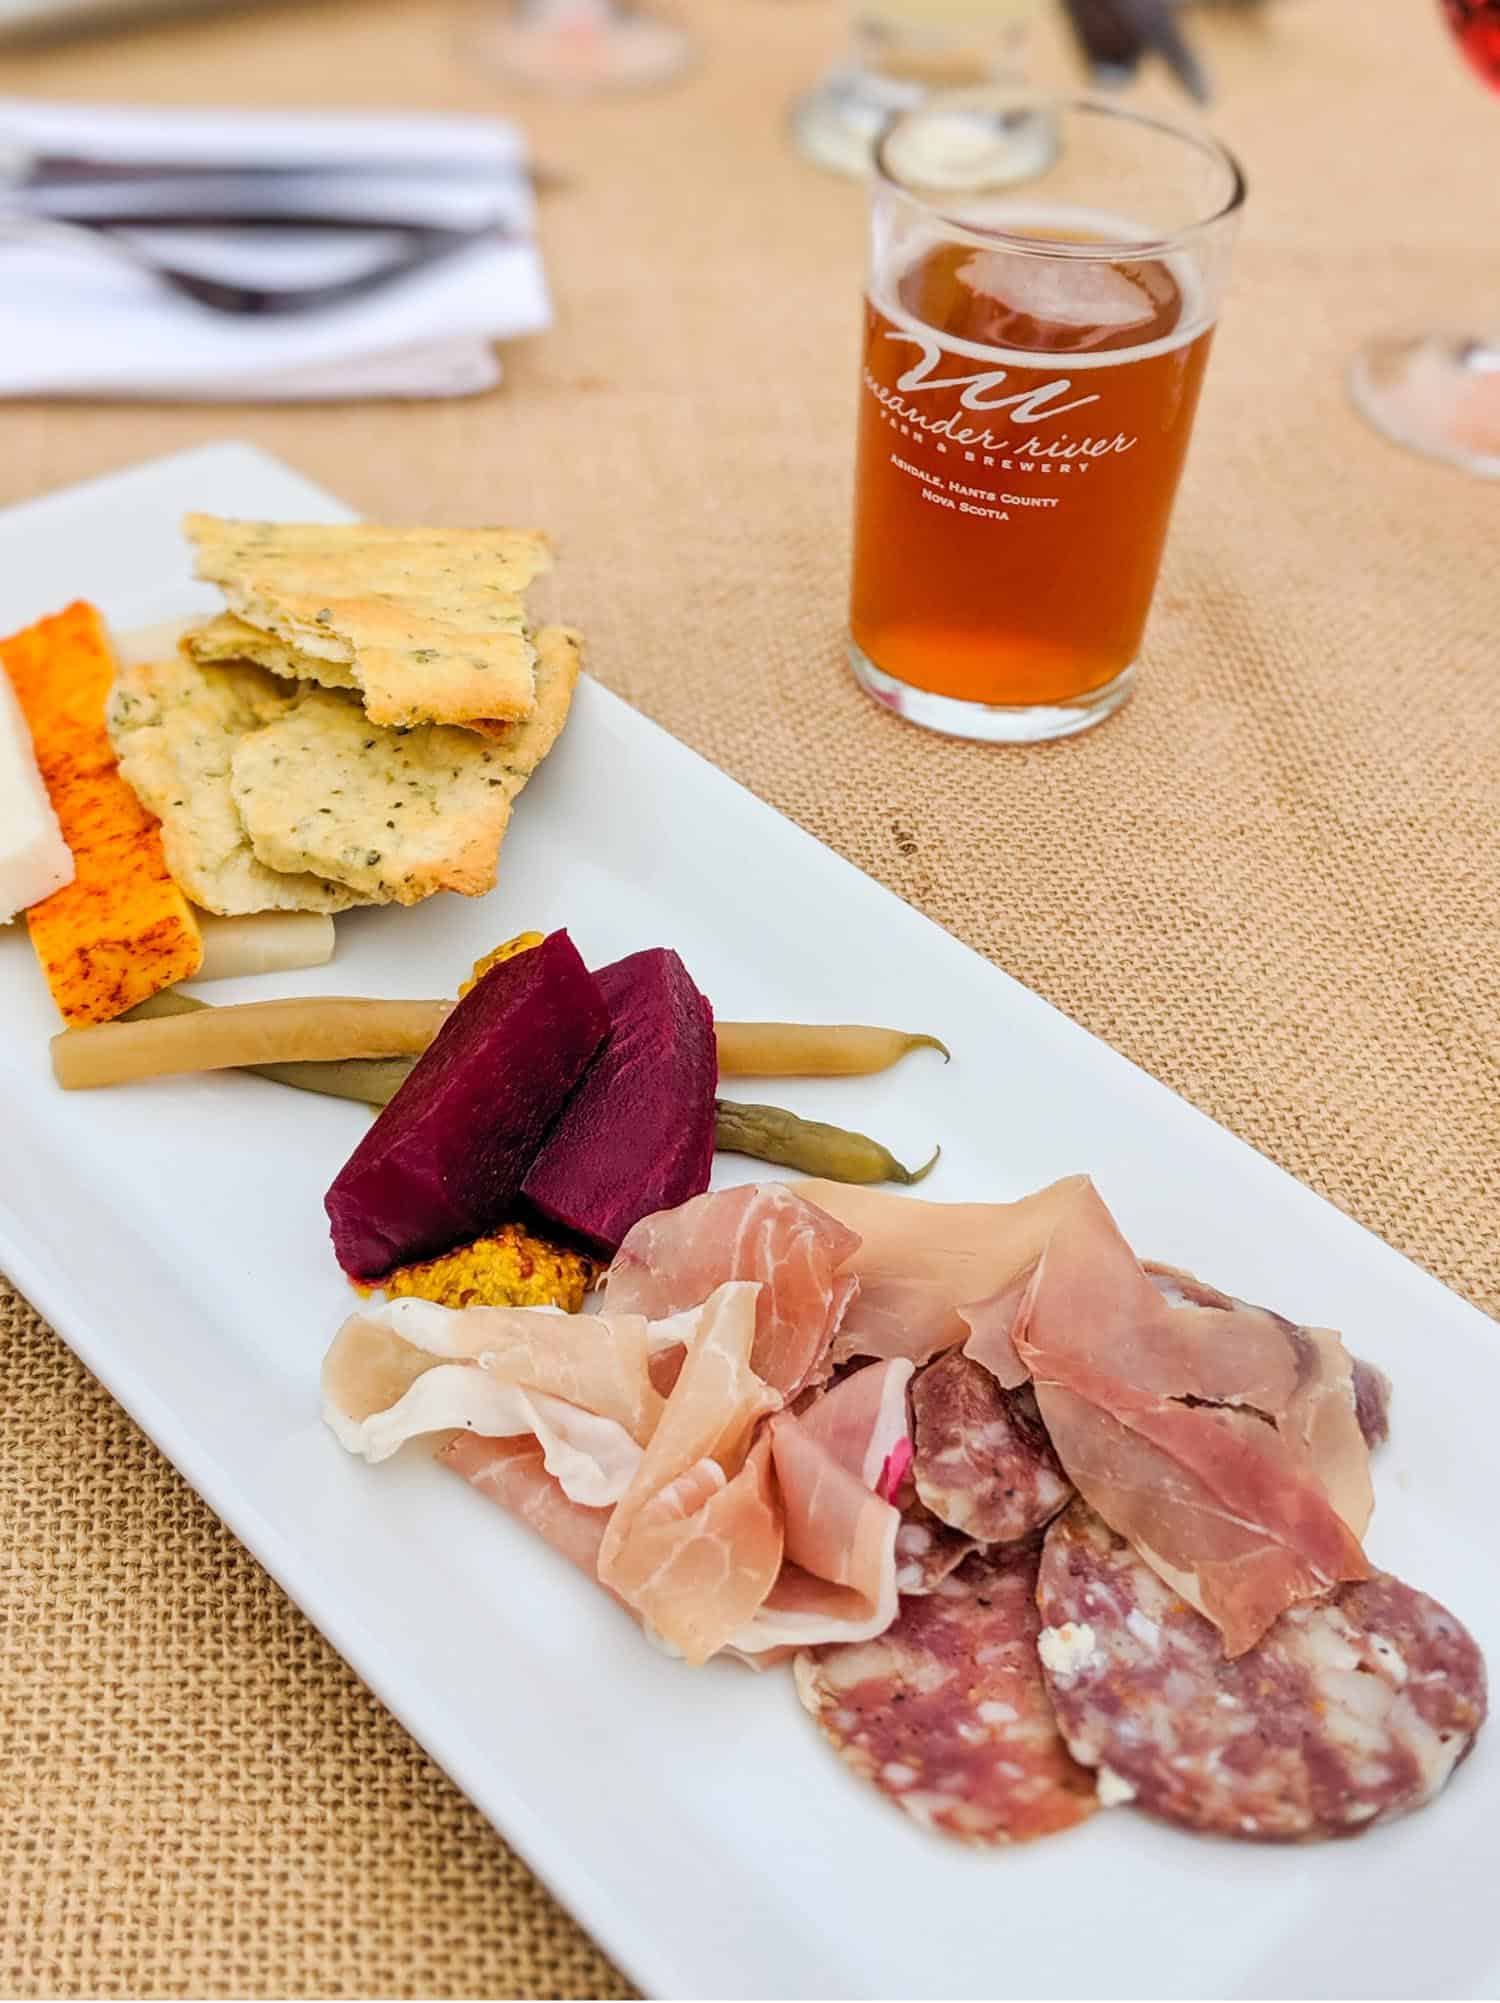 Charcuterie plate and Meandering Beer from Flying Apron Cookery and Inn